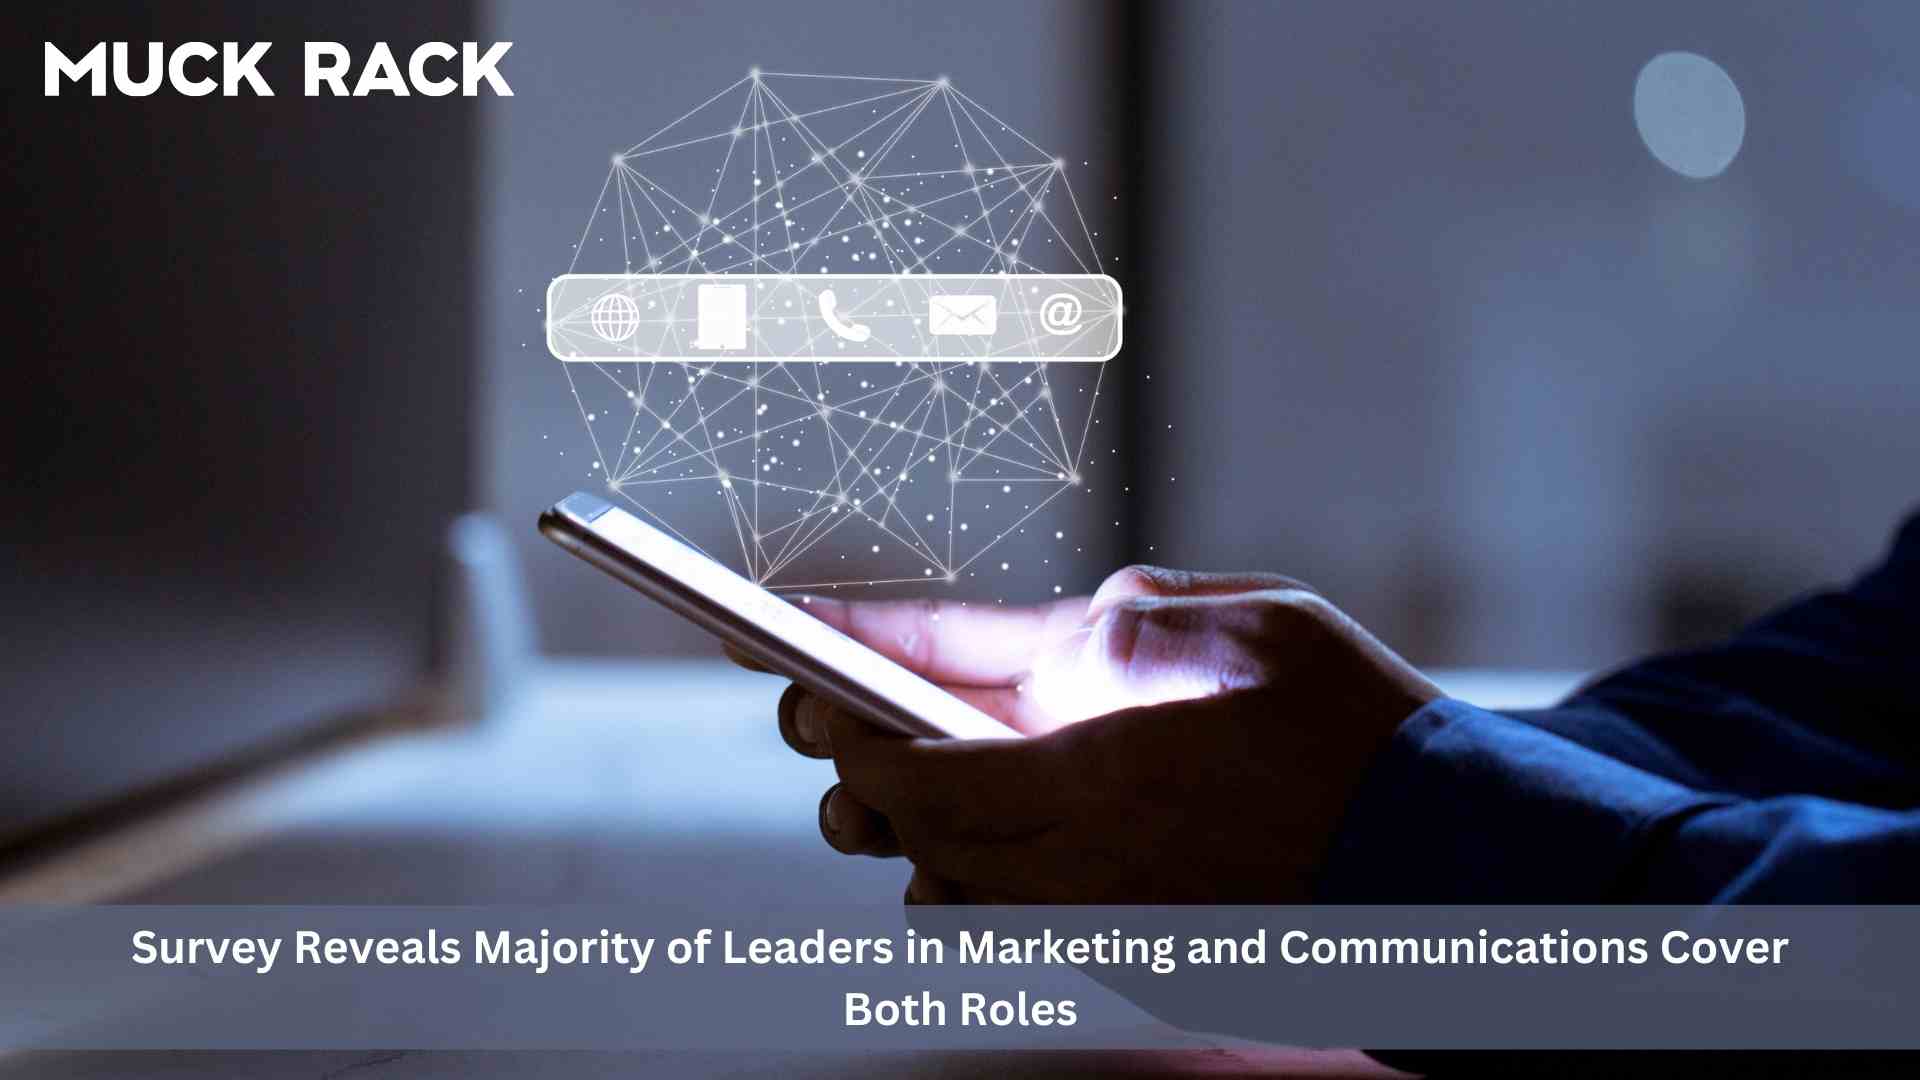 Muck Rack Data: Majority of Leaders in Marketing and Communications Cover Both Roles